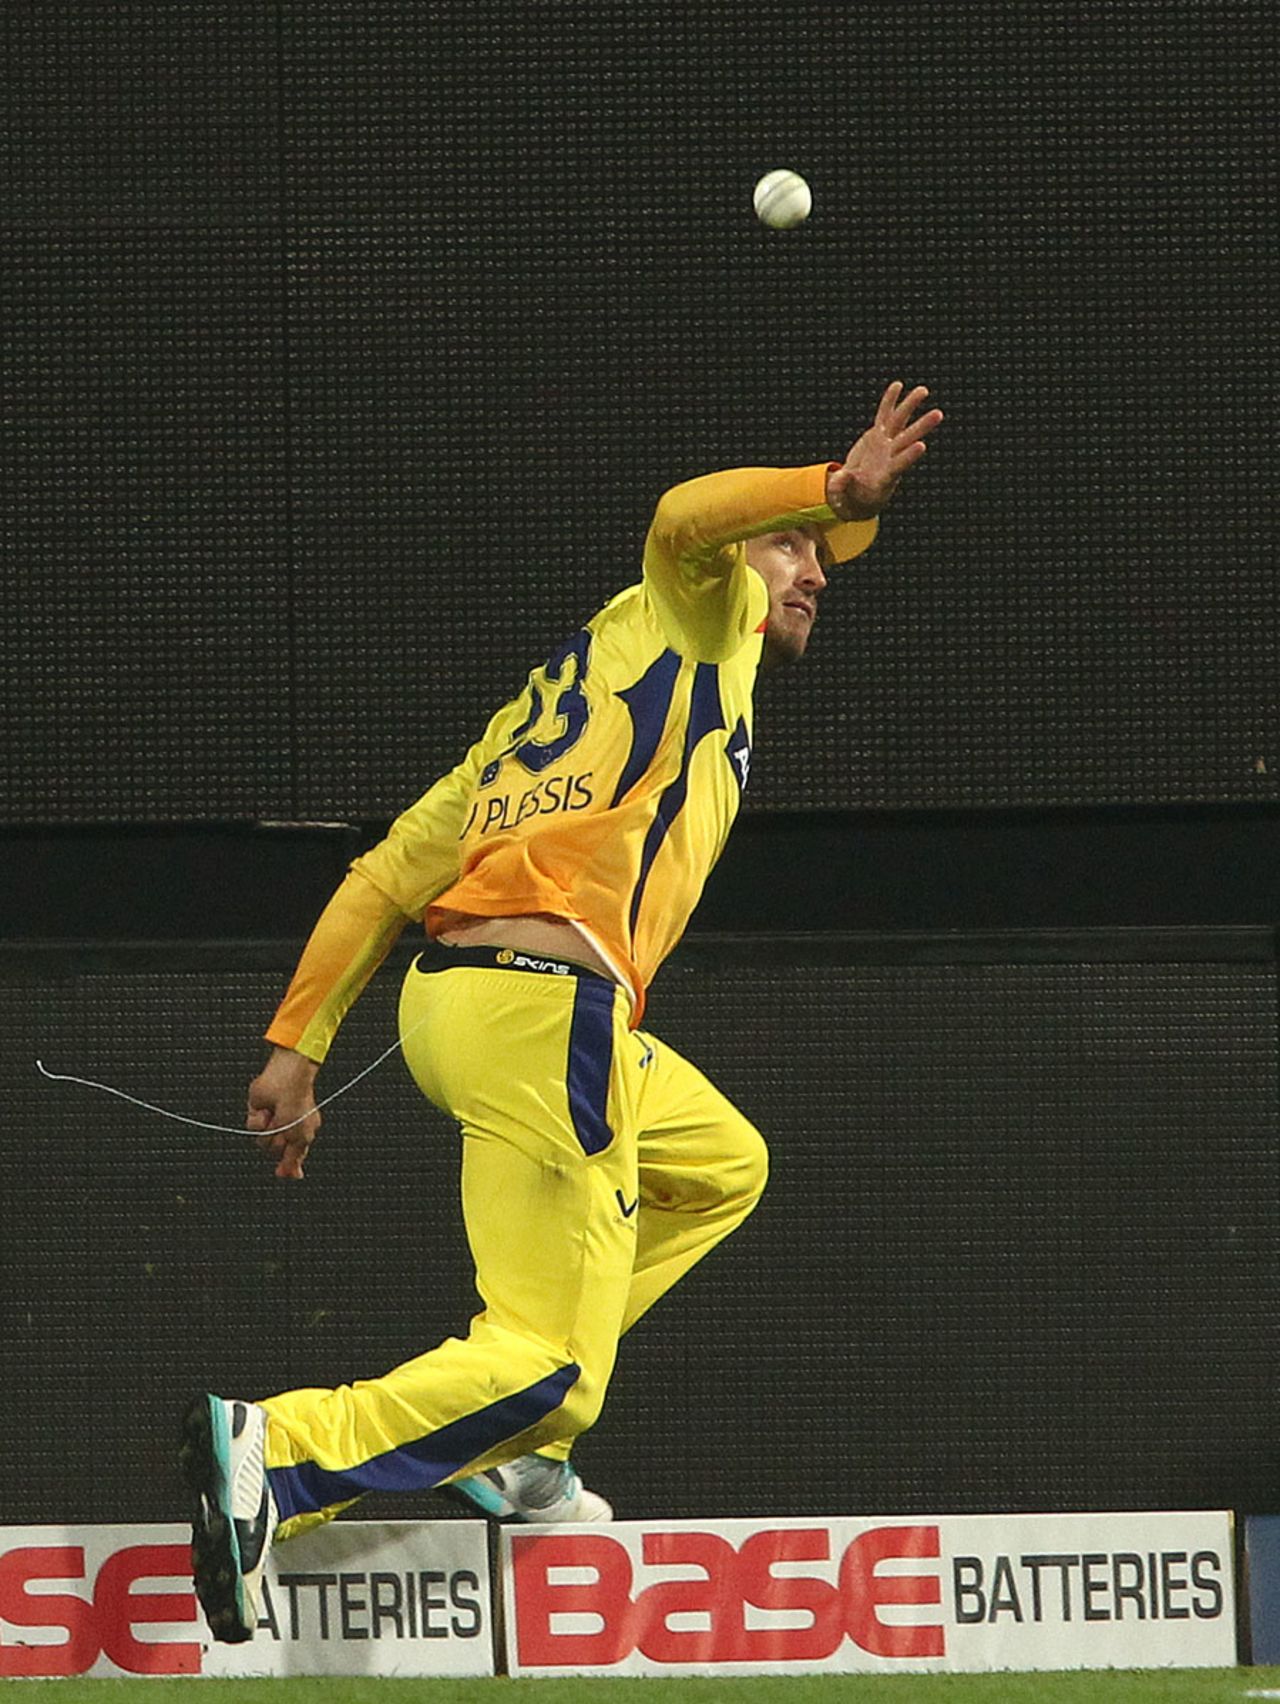 Faf du Plessis attempts to prevent a boundary, Chennai Super Kings v Dolphins, CLT20, Group A, Bangalore, September 22, 2014